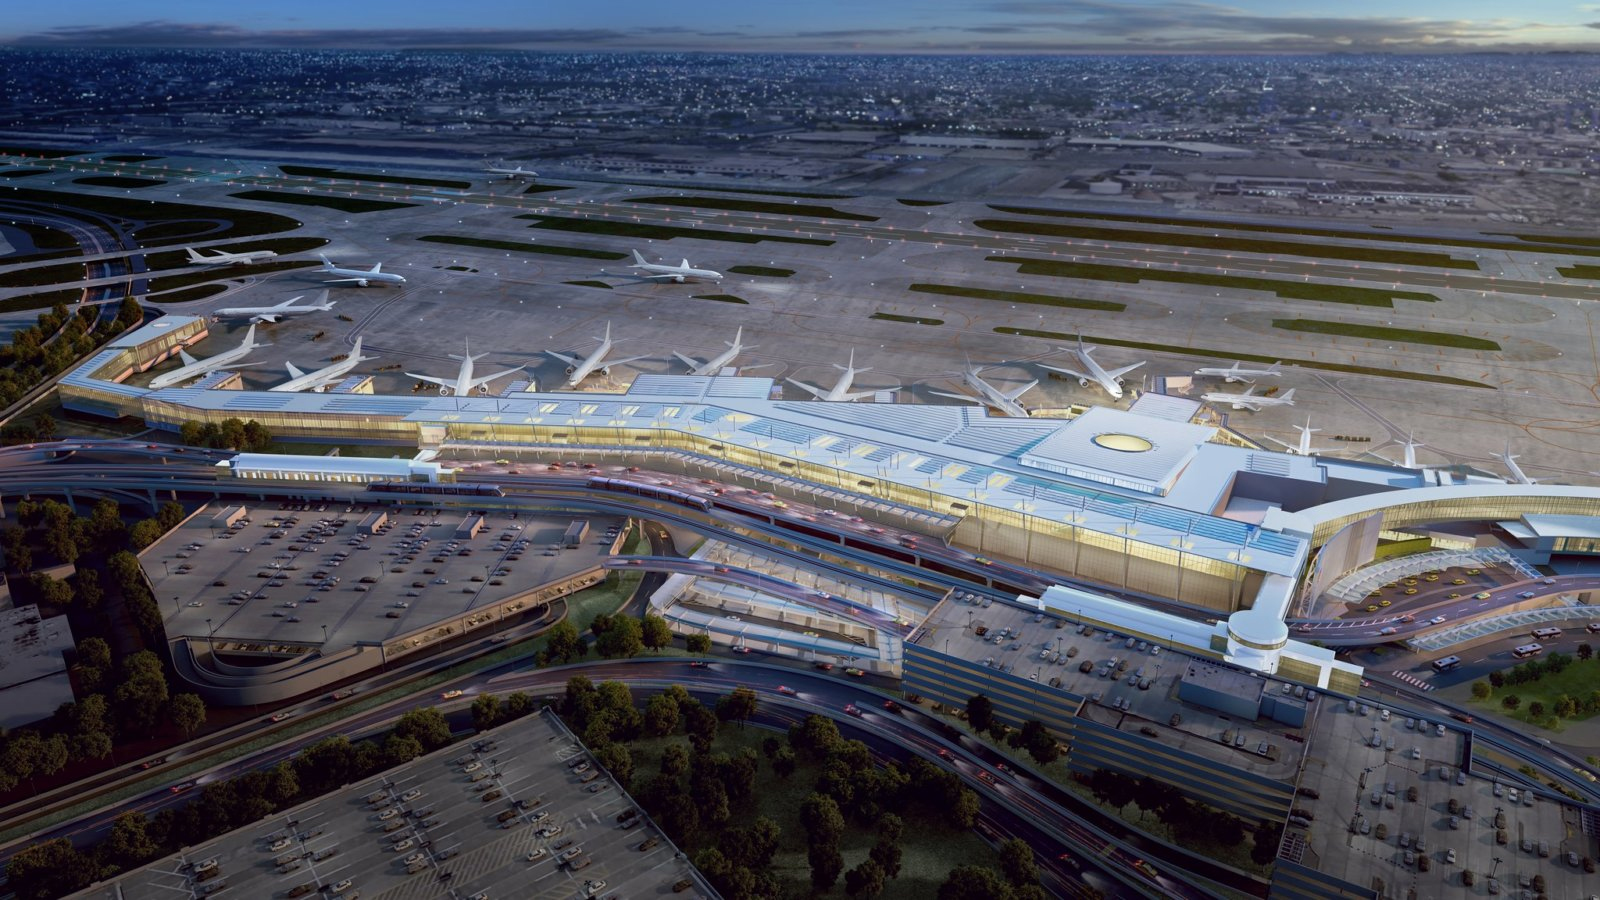 Jfks Long Delayed Terminal 6 To Break Ground Early Next Year Global